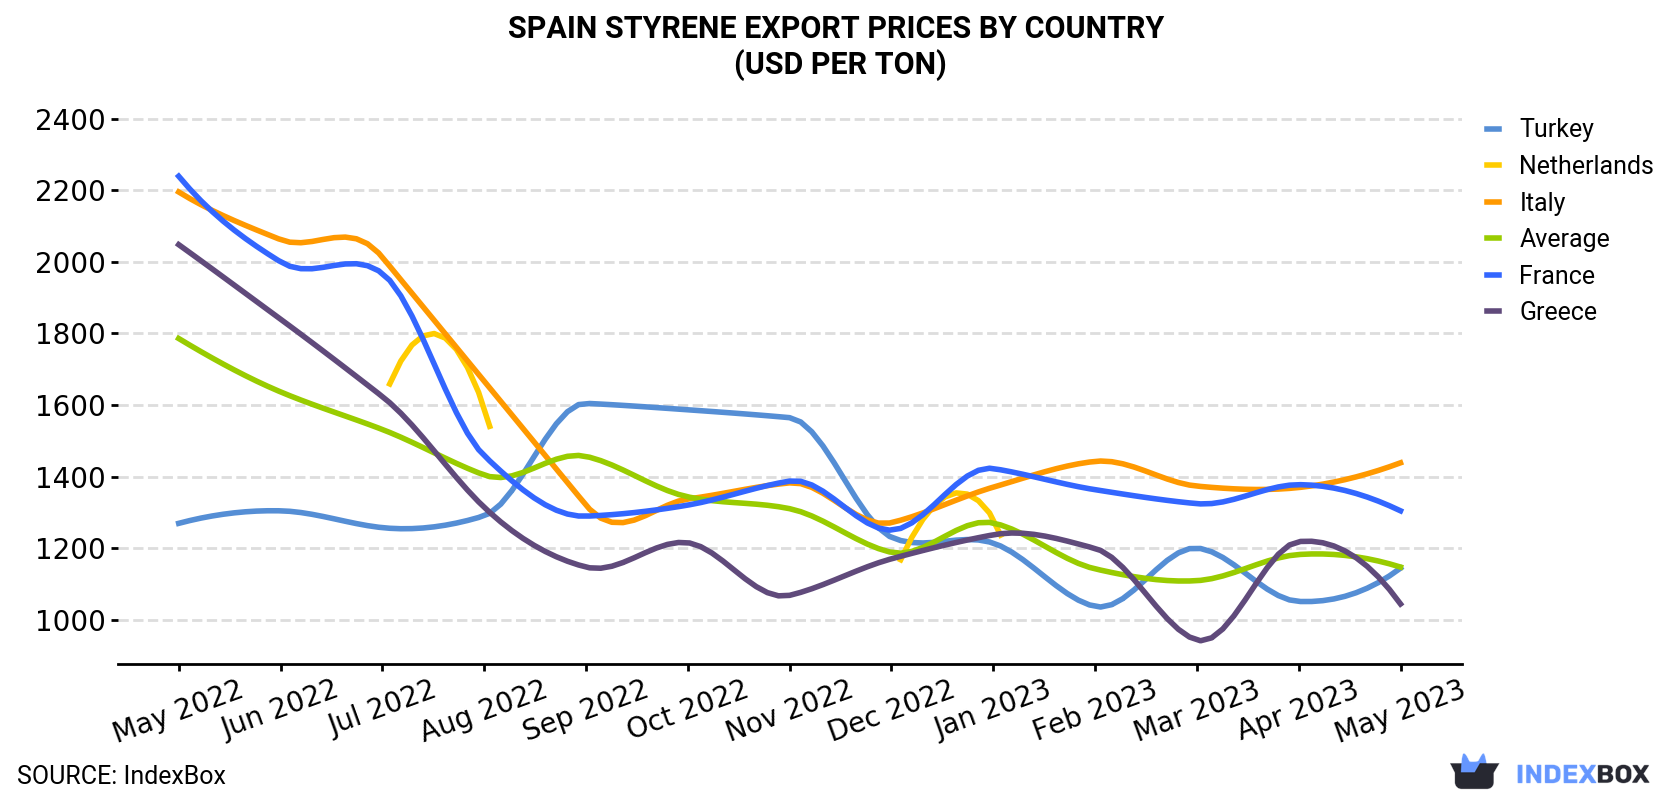 Spain Styrene Export Prices By Country (USD Per Ton)